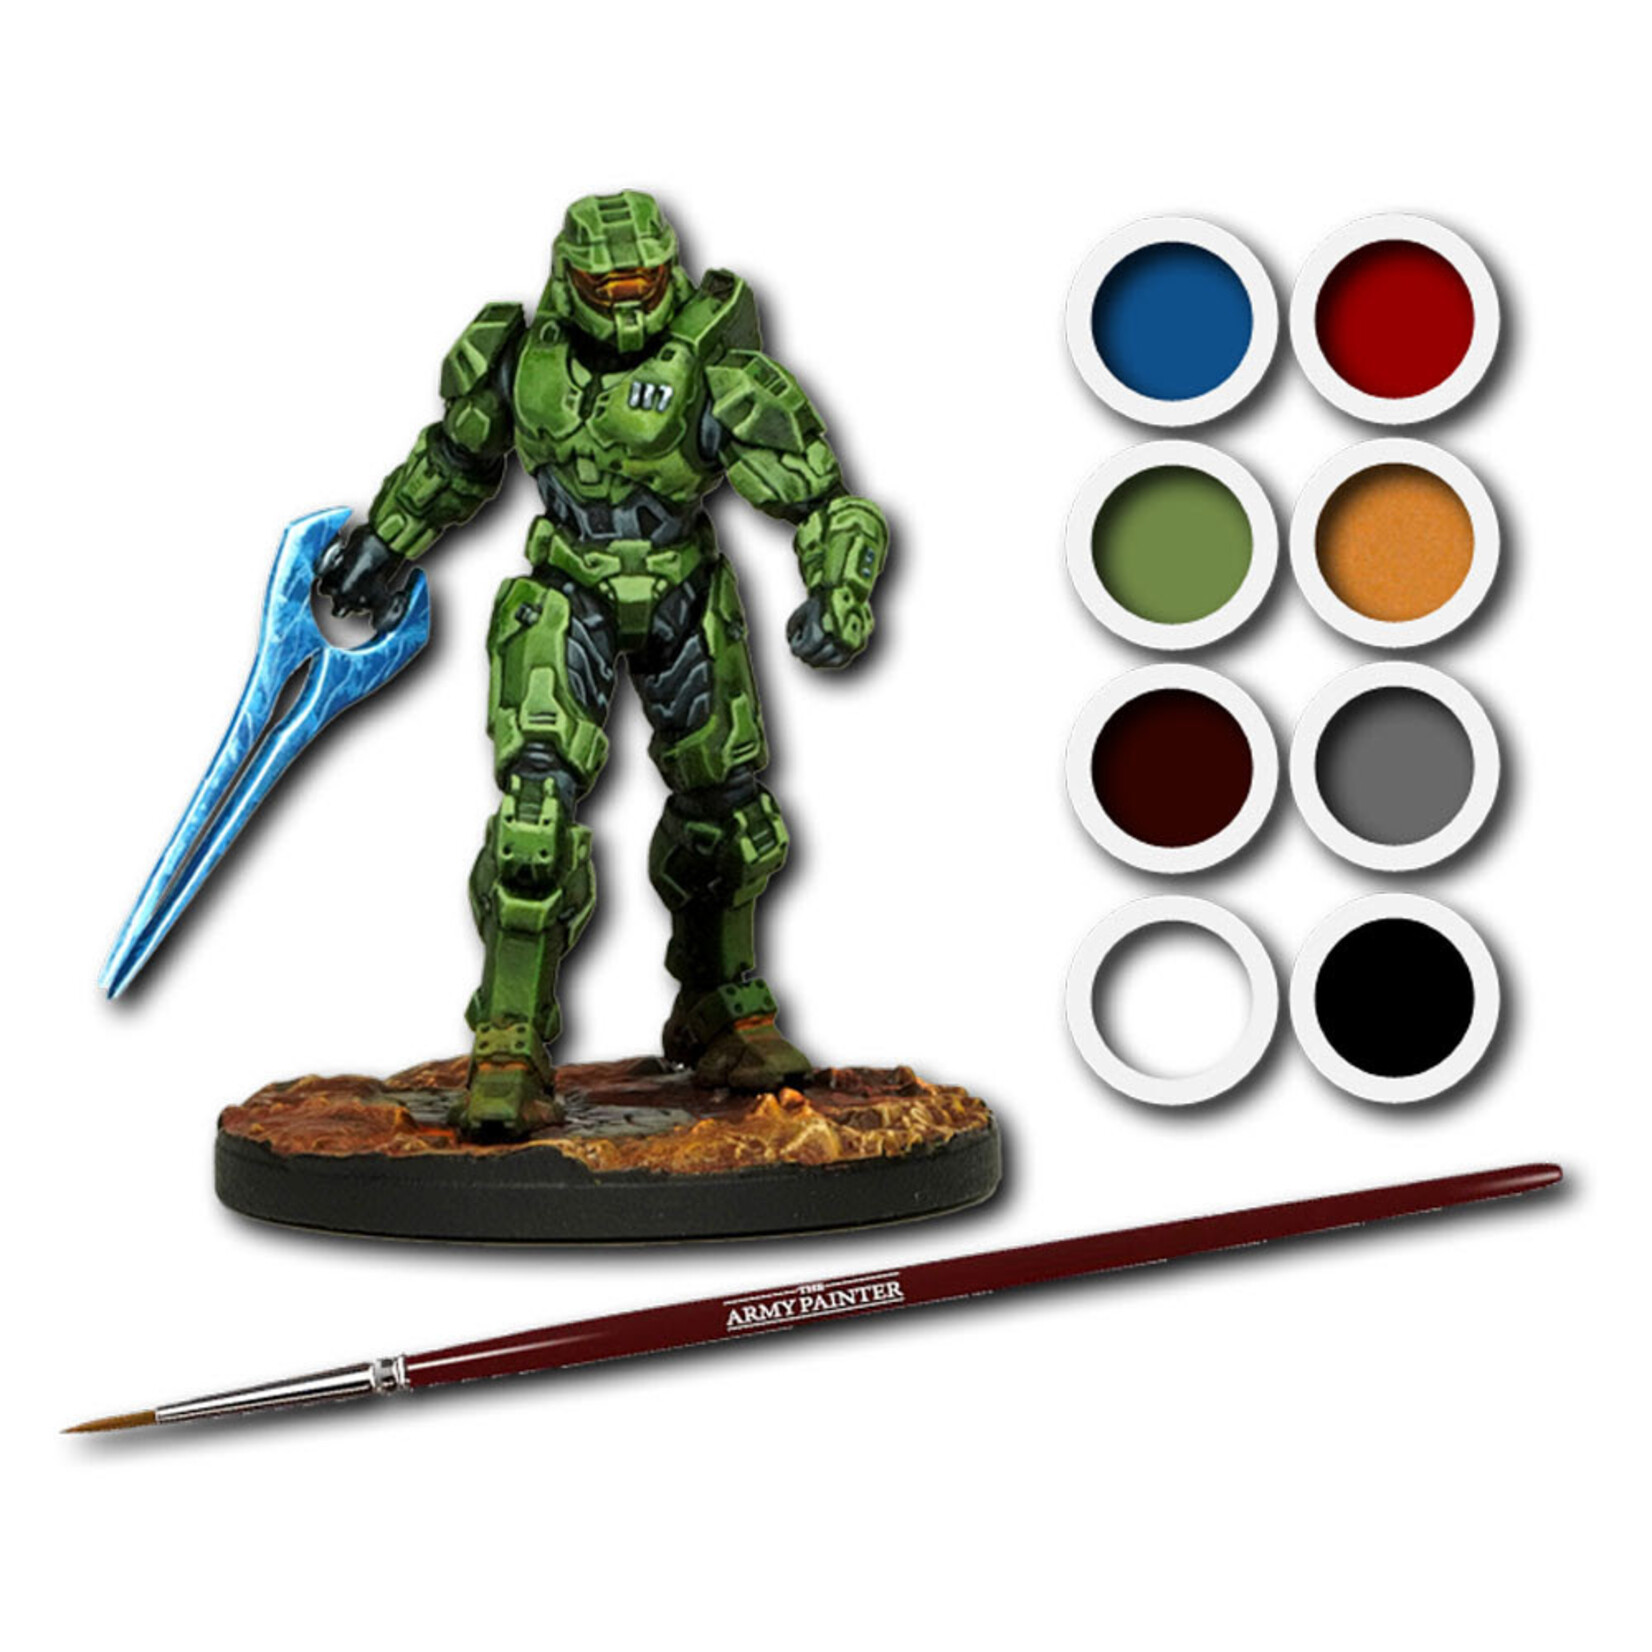 Halo: Flashpoint Master Chief Paint Set